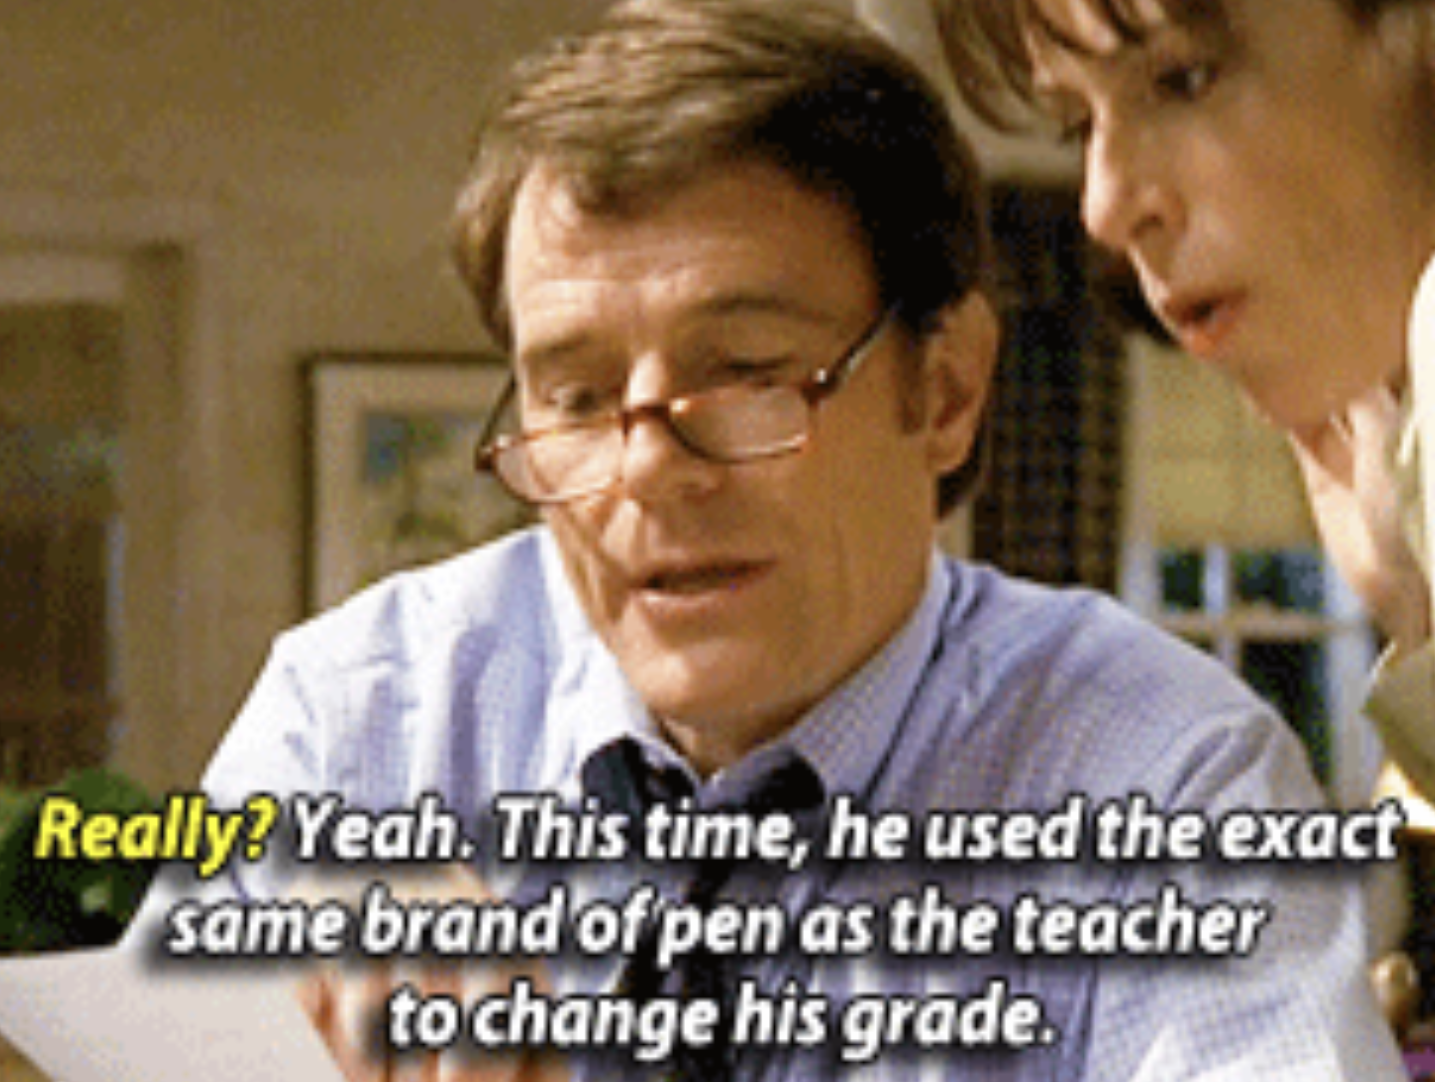 Malcom in the Middle memes - authorised dealer - Really? Yeah. This time, he used the exact same brand of pen as the teacher to change his grade.